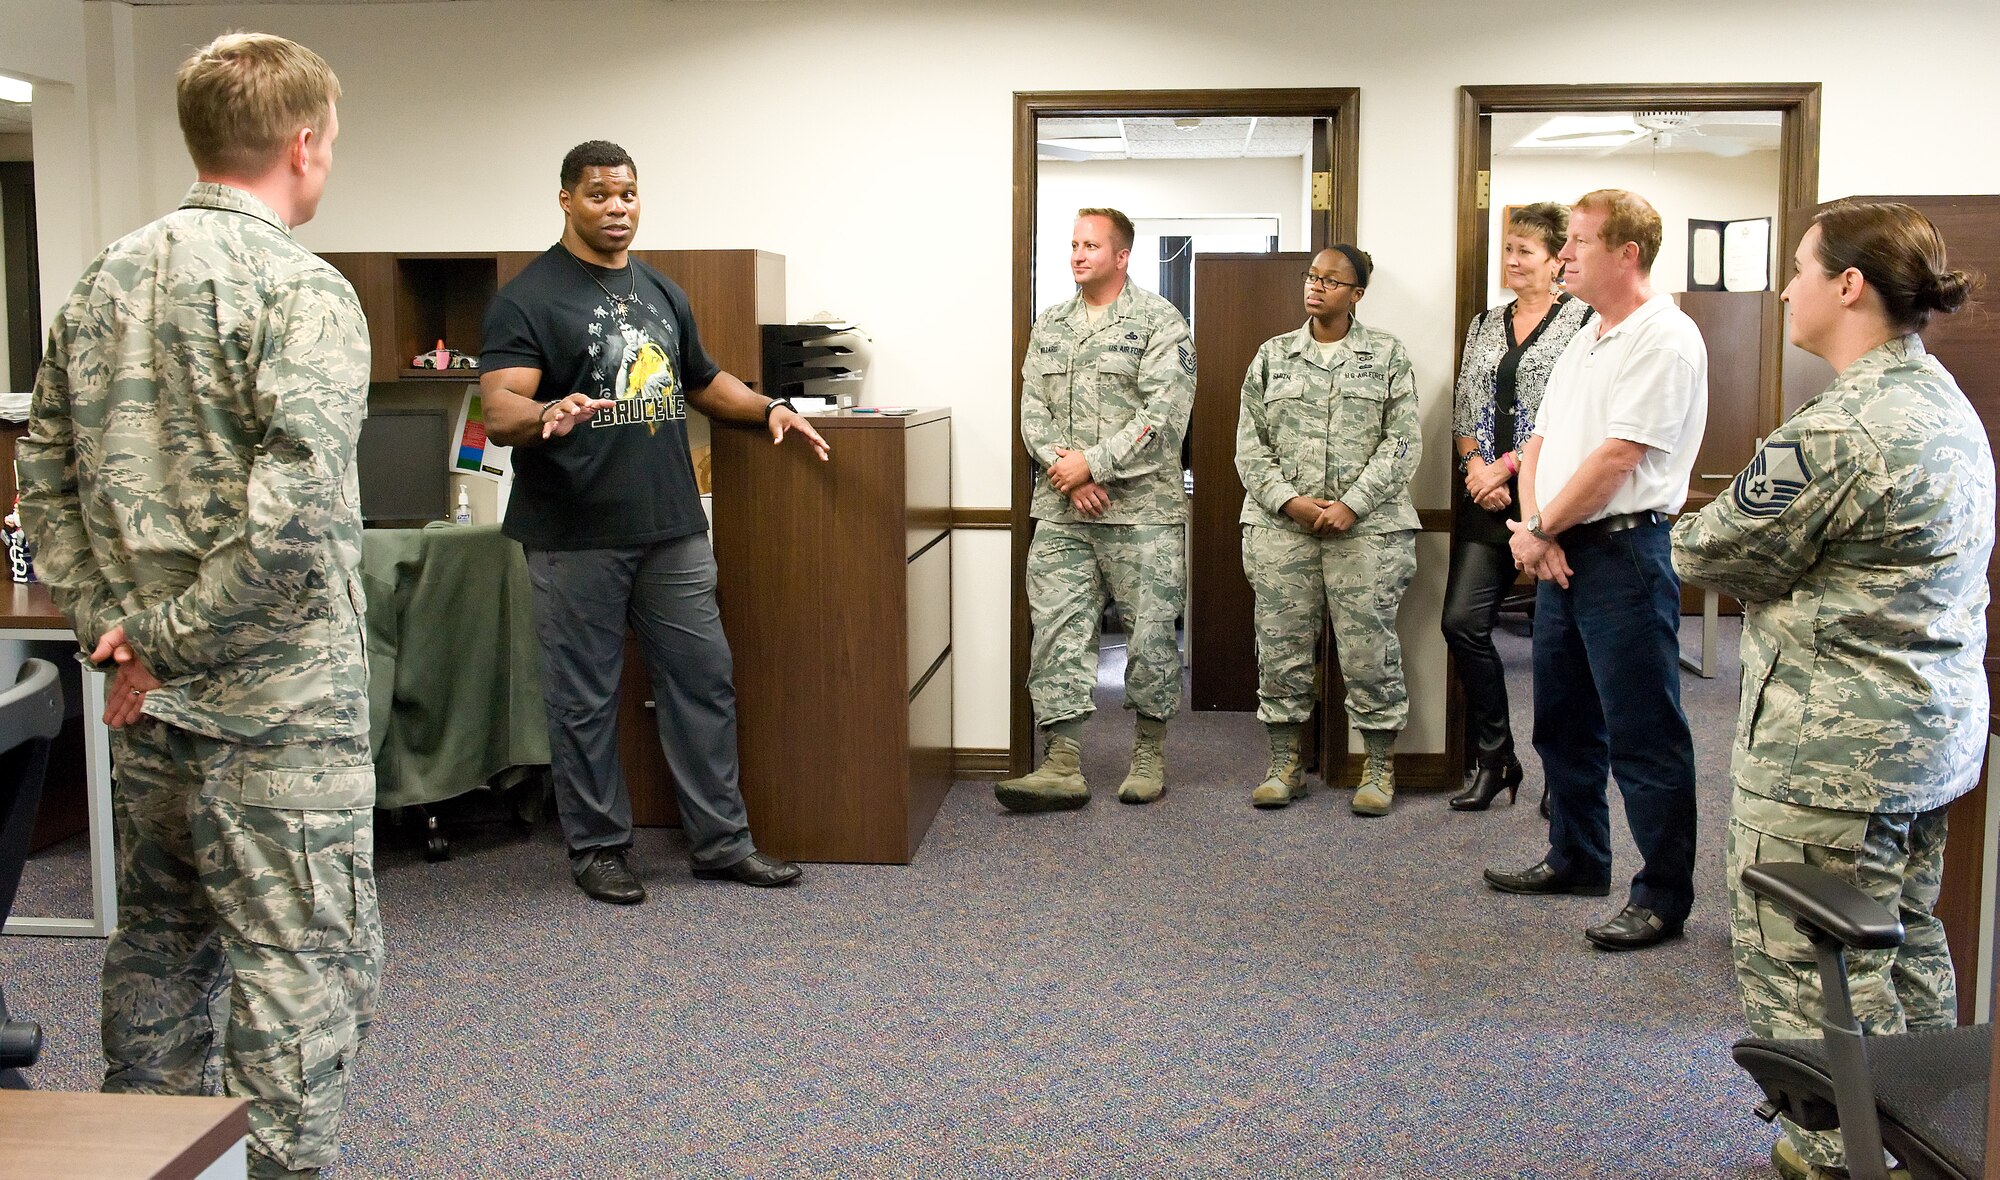 Herschel Walker, second from left, chats with members of the 436th Airlift Wing Safety Office Oct. 13, 2015, on Dover Air Force Base, Del. Walker shared stories about his upbringing, family, business and sports career, including his experience and treatment of Dissociative Identity Disorder by seeking the help of behavioral health professionals. (U.S. Air Force photo/Roland Balik)